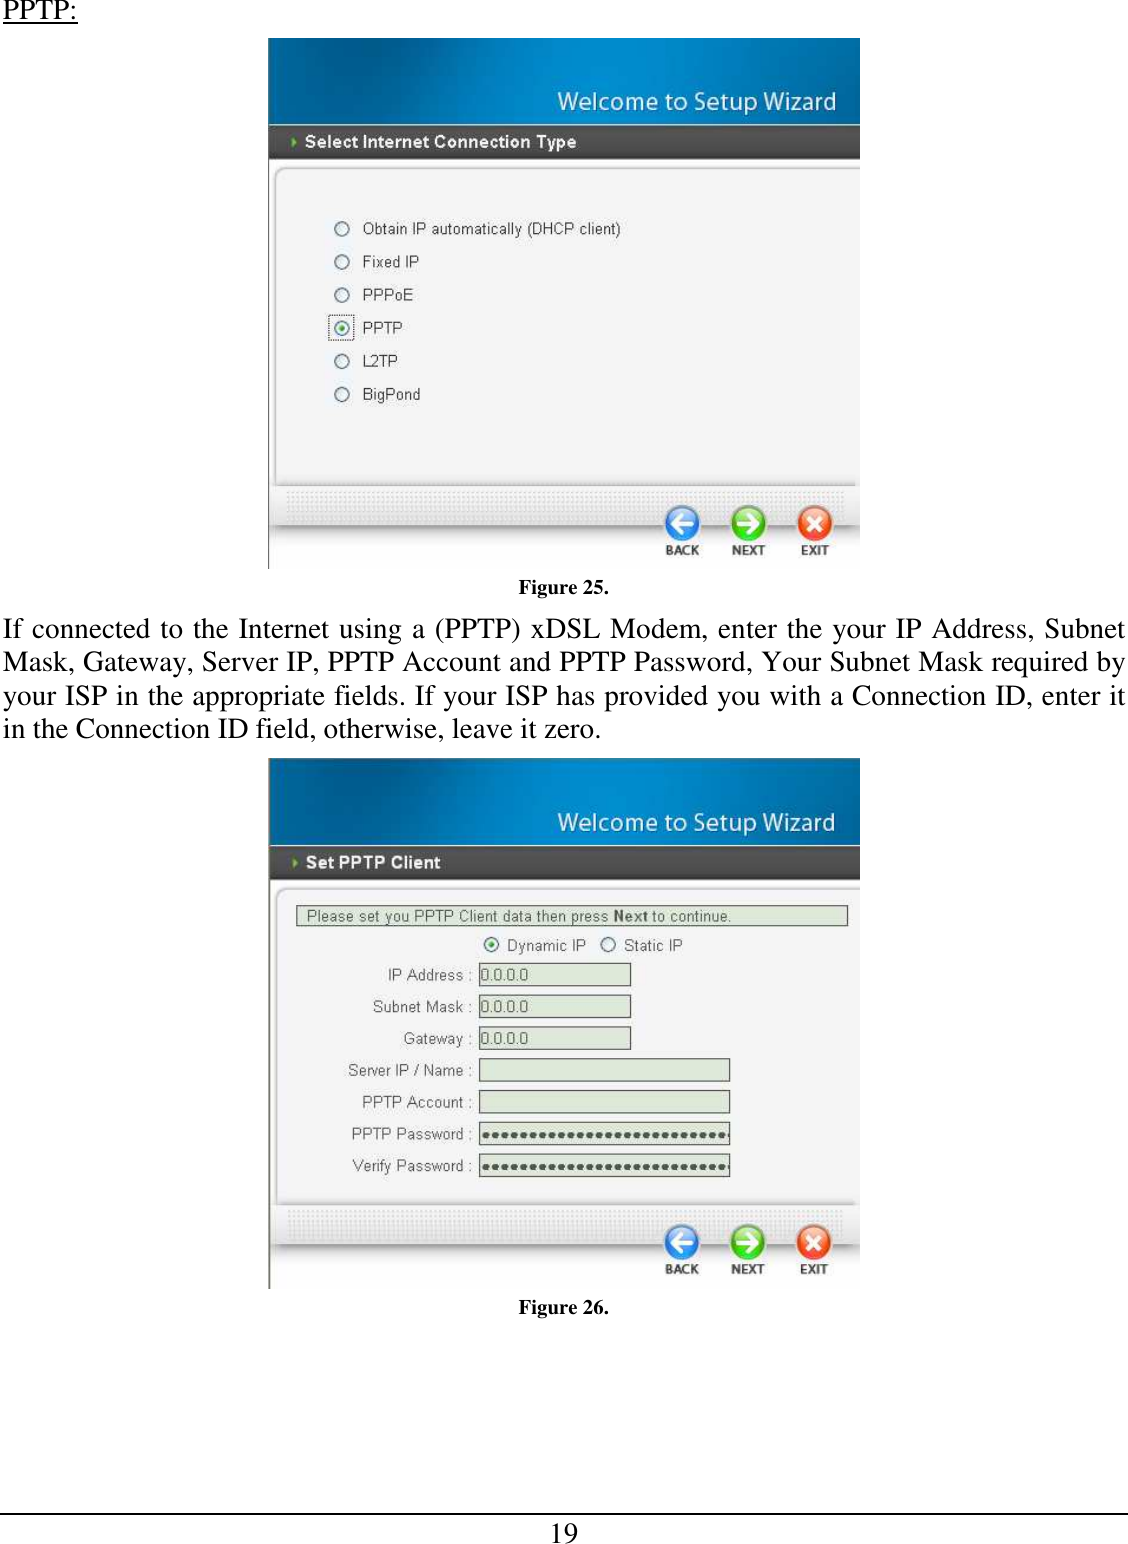 19 PPTP:  Figure 25. If connected to the Internet using a (PPTP) xDSL Modem, enter the your IP Address, Subnet Mask, Gateway, Server IP, PPTP Account and PPTP Password, Your Subnet Mask required by your ISP in the appropriate fields. If your ISP has provided you with a Connection ID, enter it in the Connection ID field, otherwise, leave it zero.   Figure 26. 